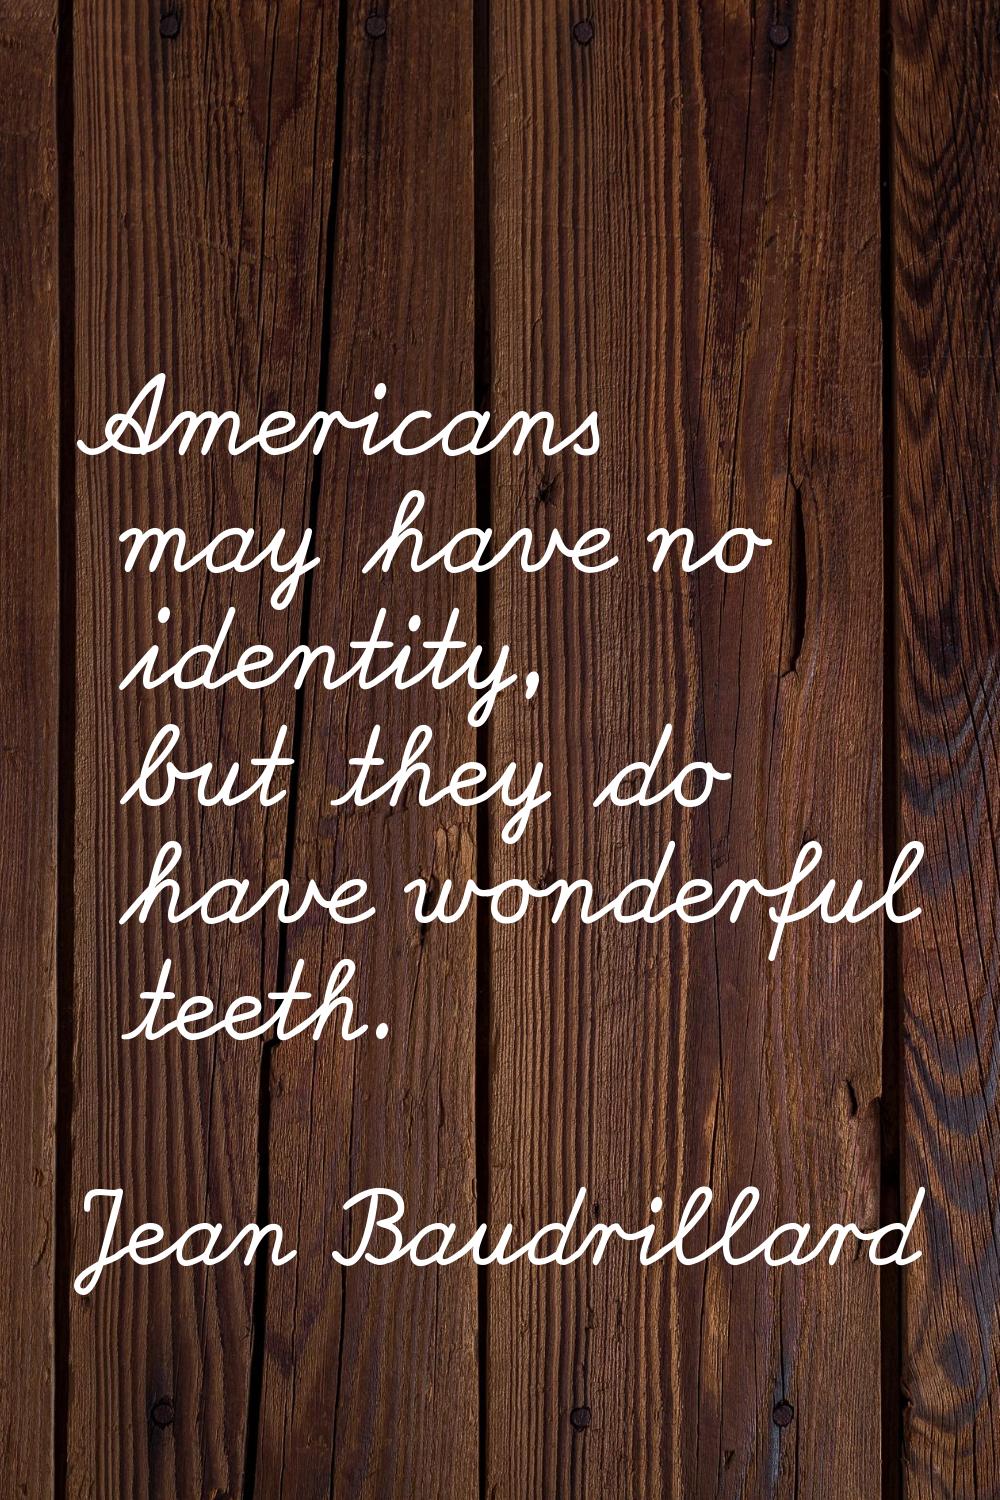 Americans may have no identity, but they do have wonderful teeth.